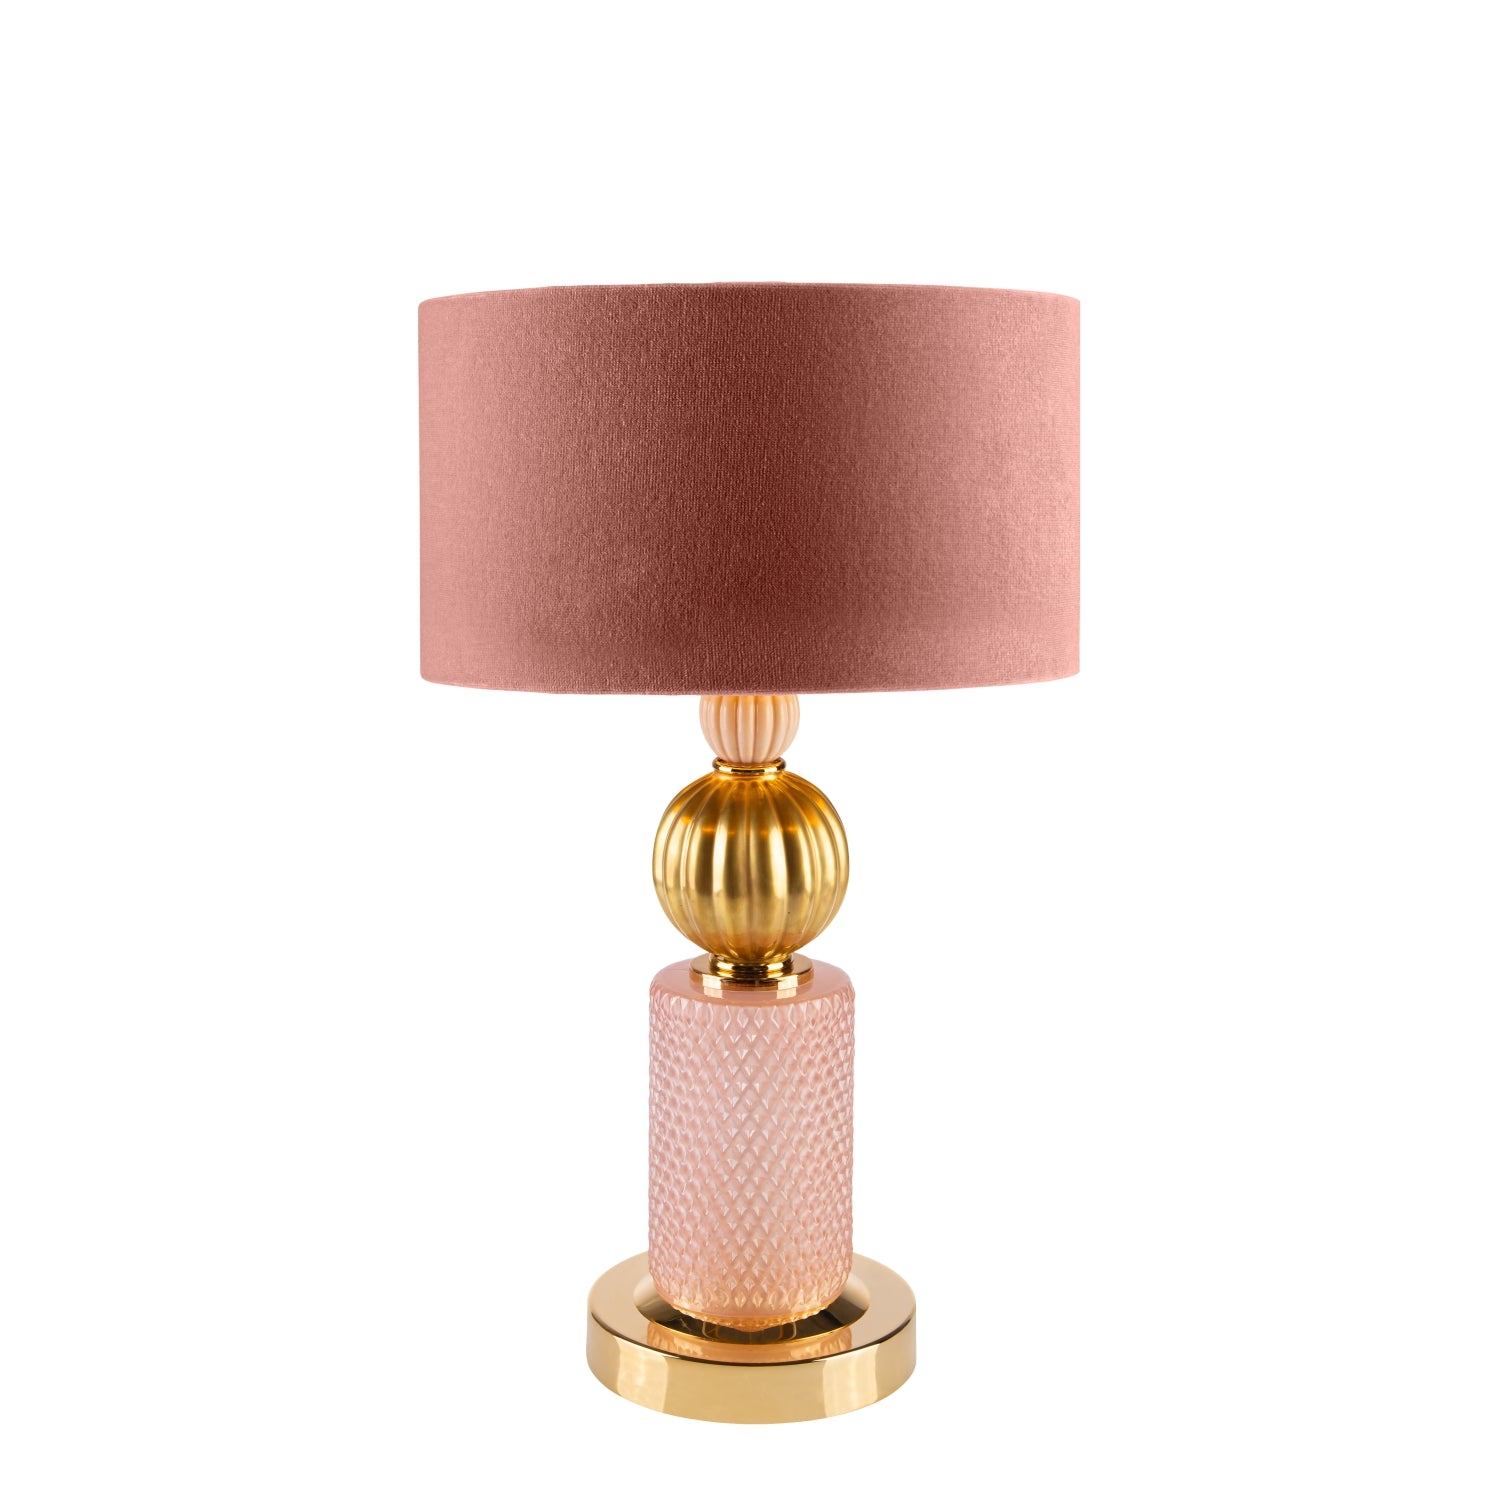 Athena Table Lamp - Pink & Gold